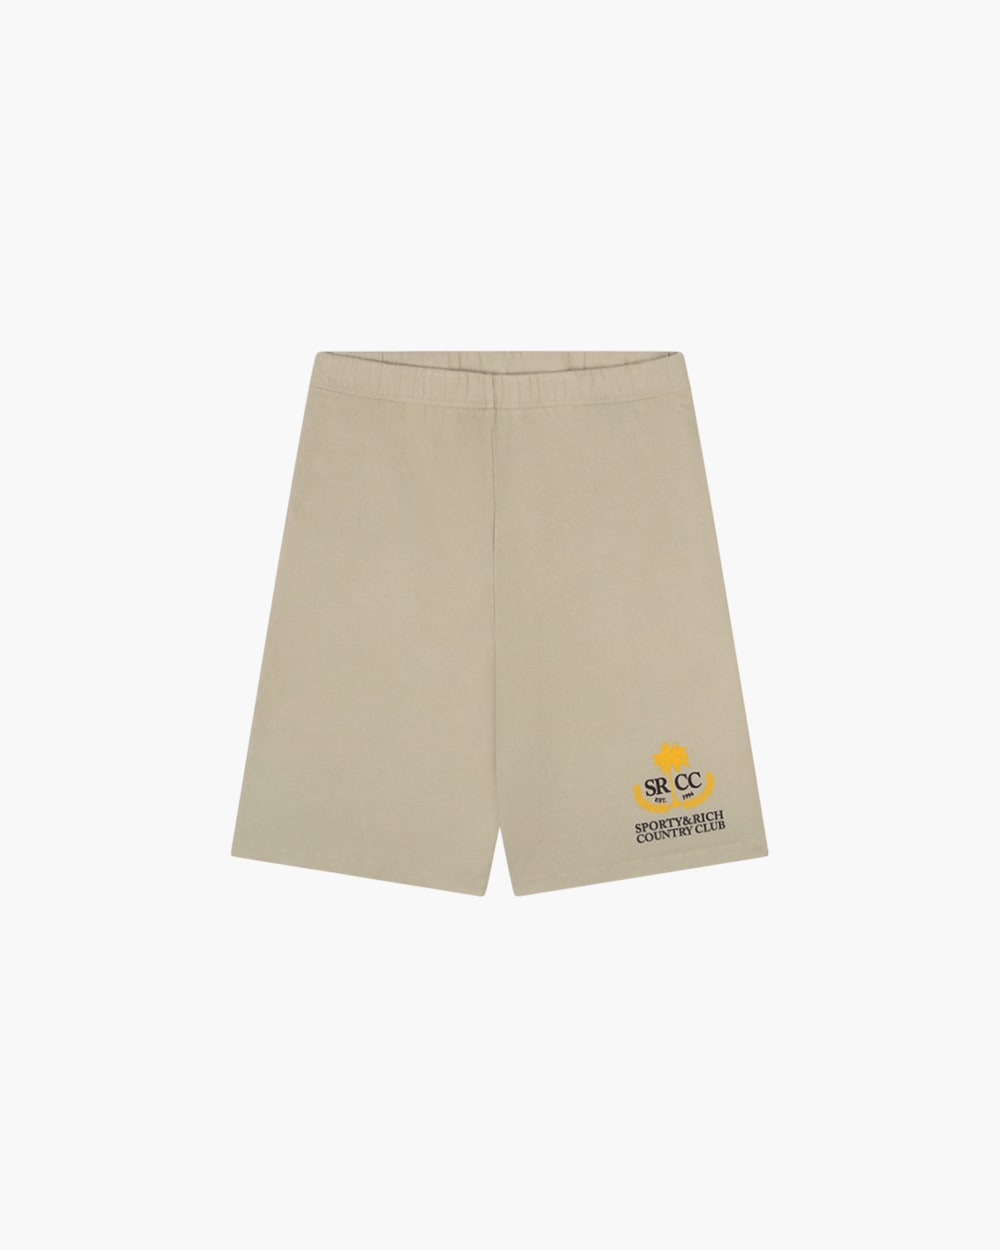 SPORTY AND RICH COUNTRY CLUB BIKER SHORTS